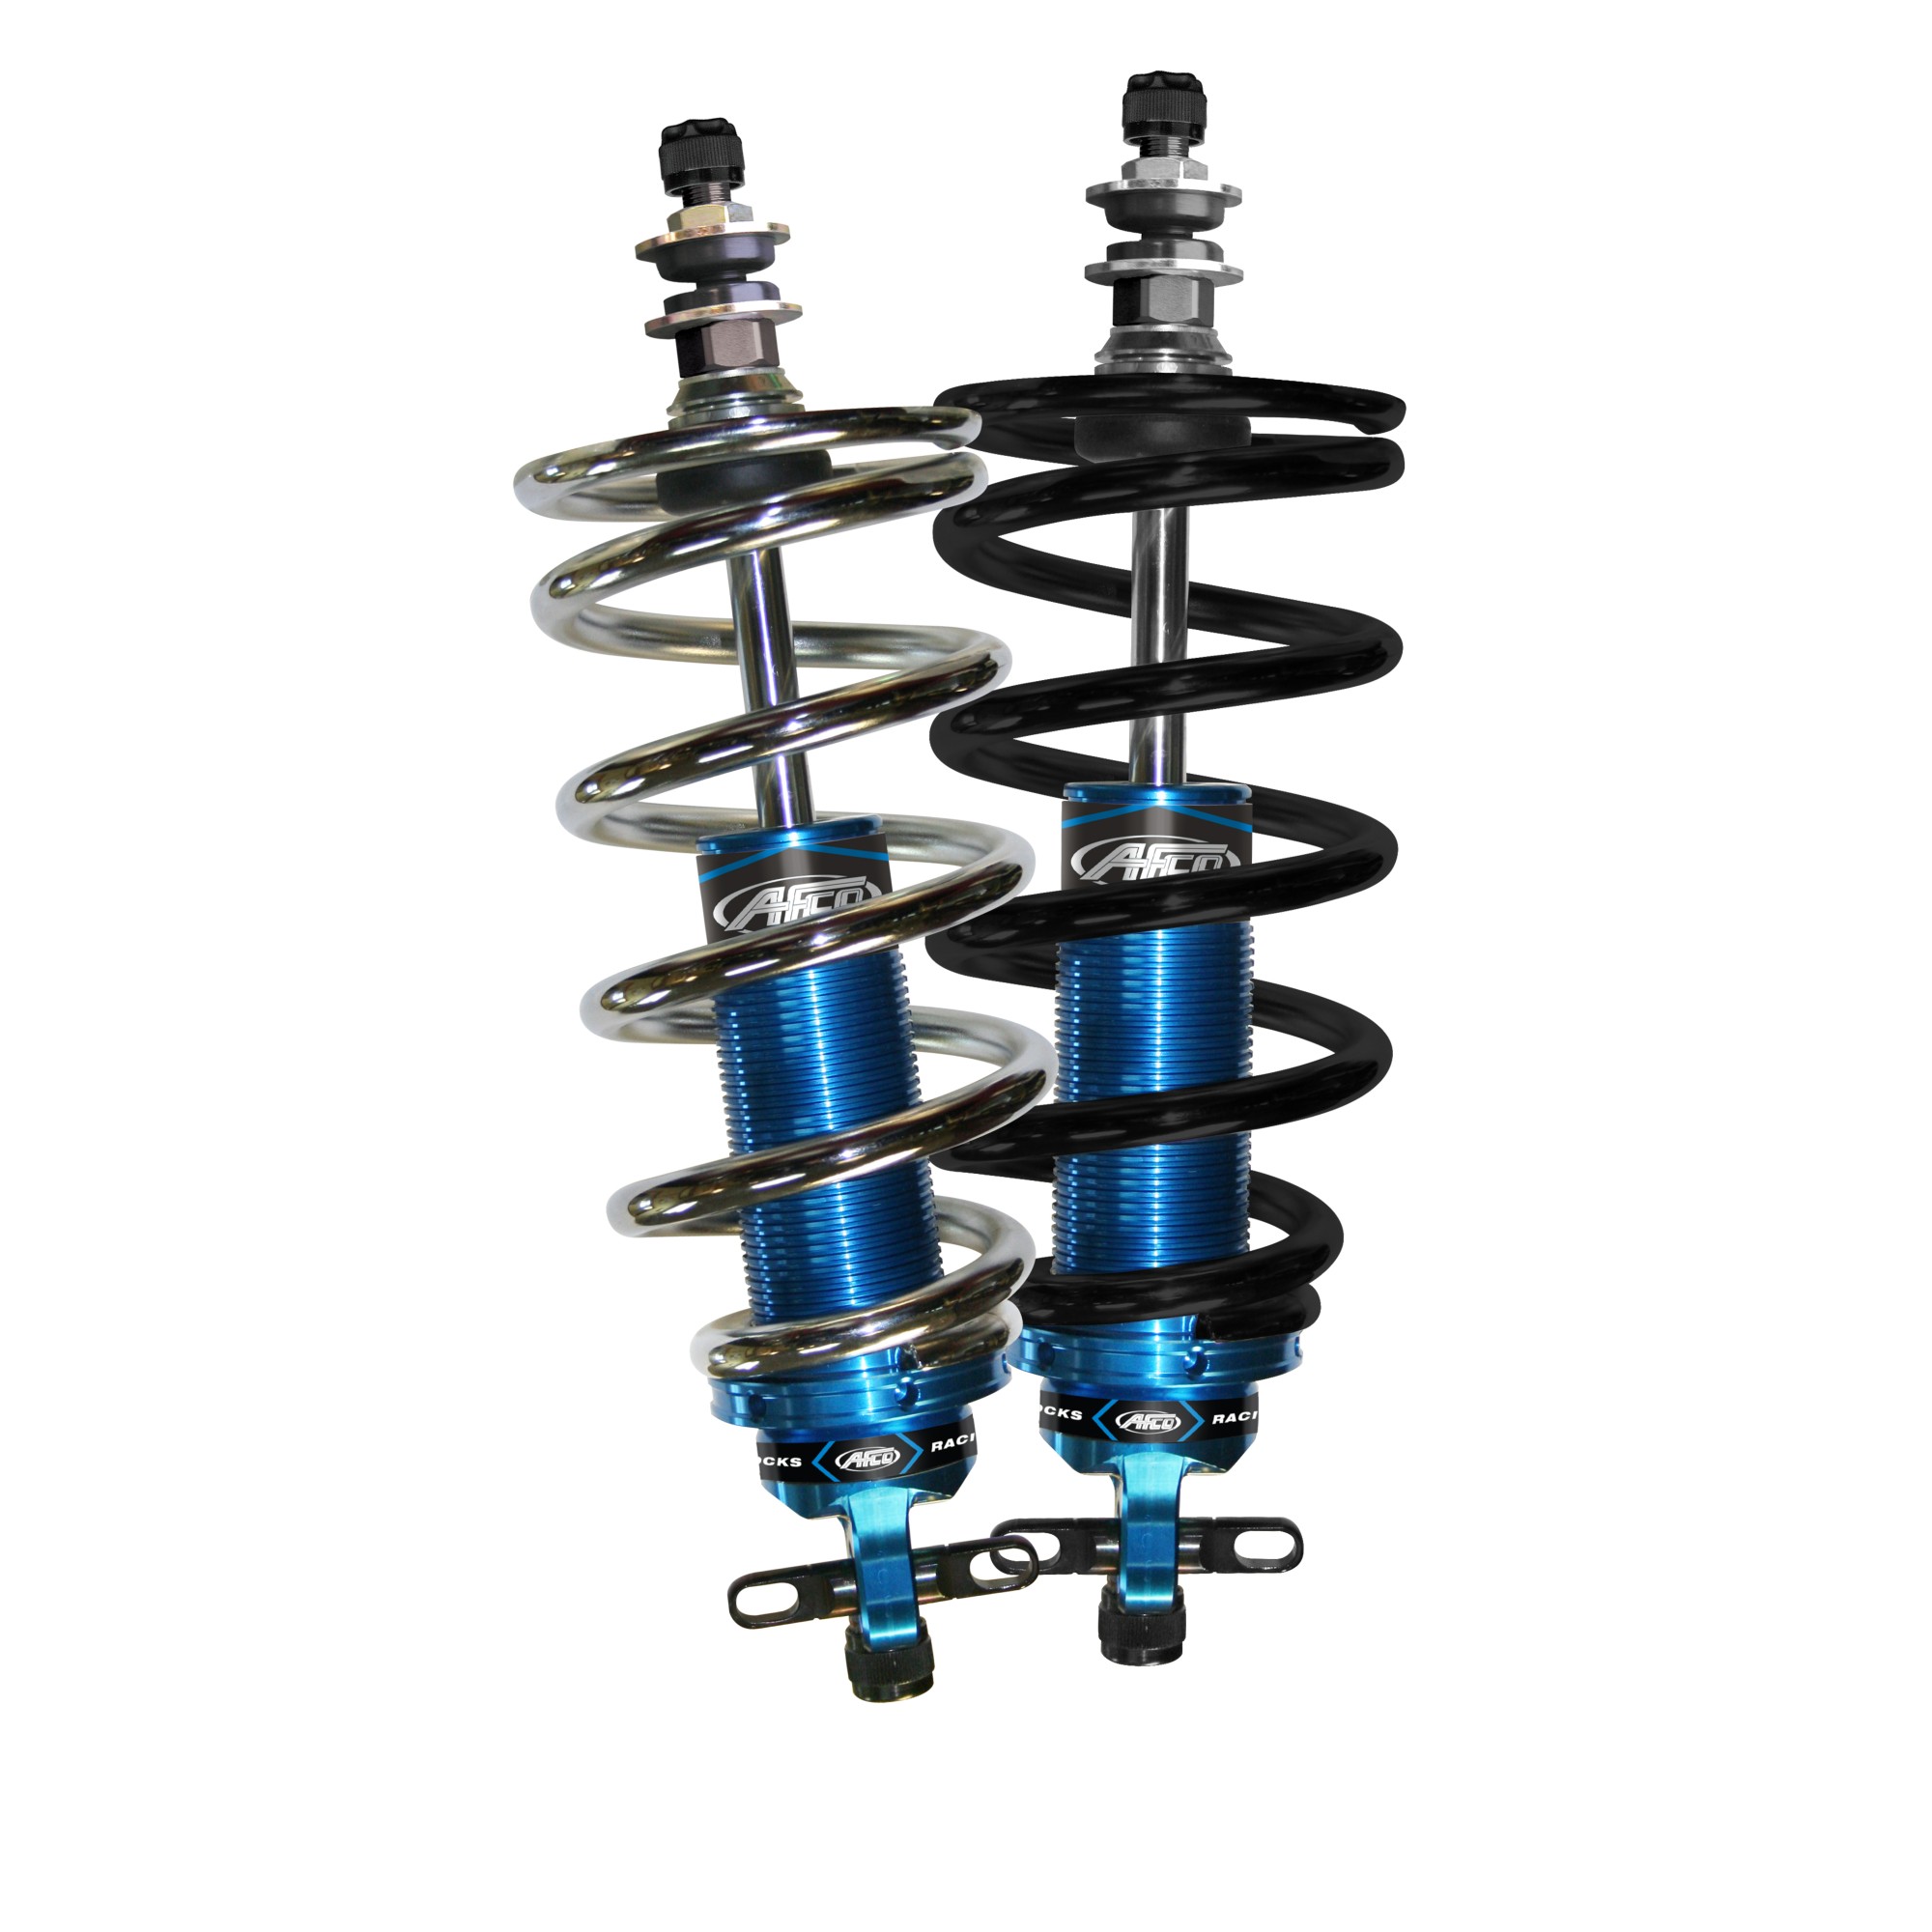 GM Double Adjustable Front Coil-over Conversion Kit Fits 68-83 Chevelle/Monte Carlo/Malibu With Big Block Engine.